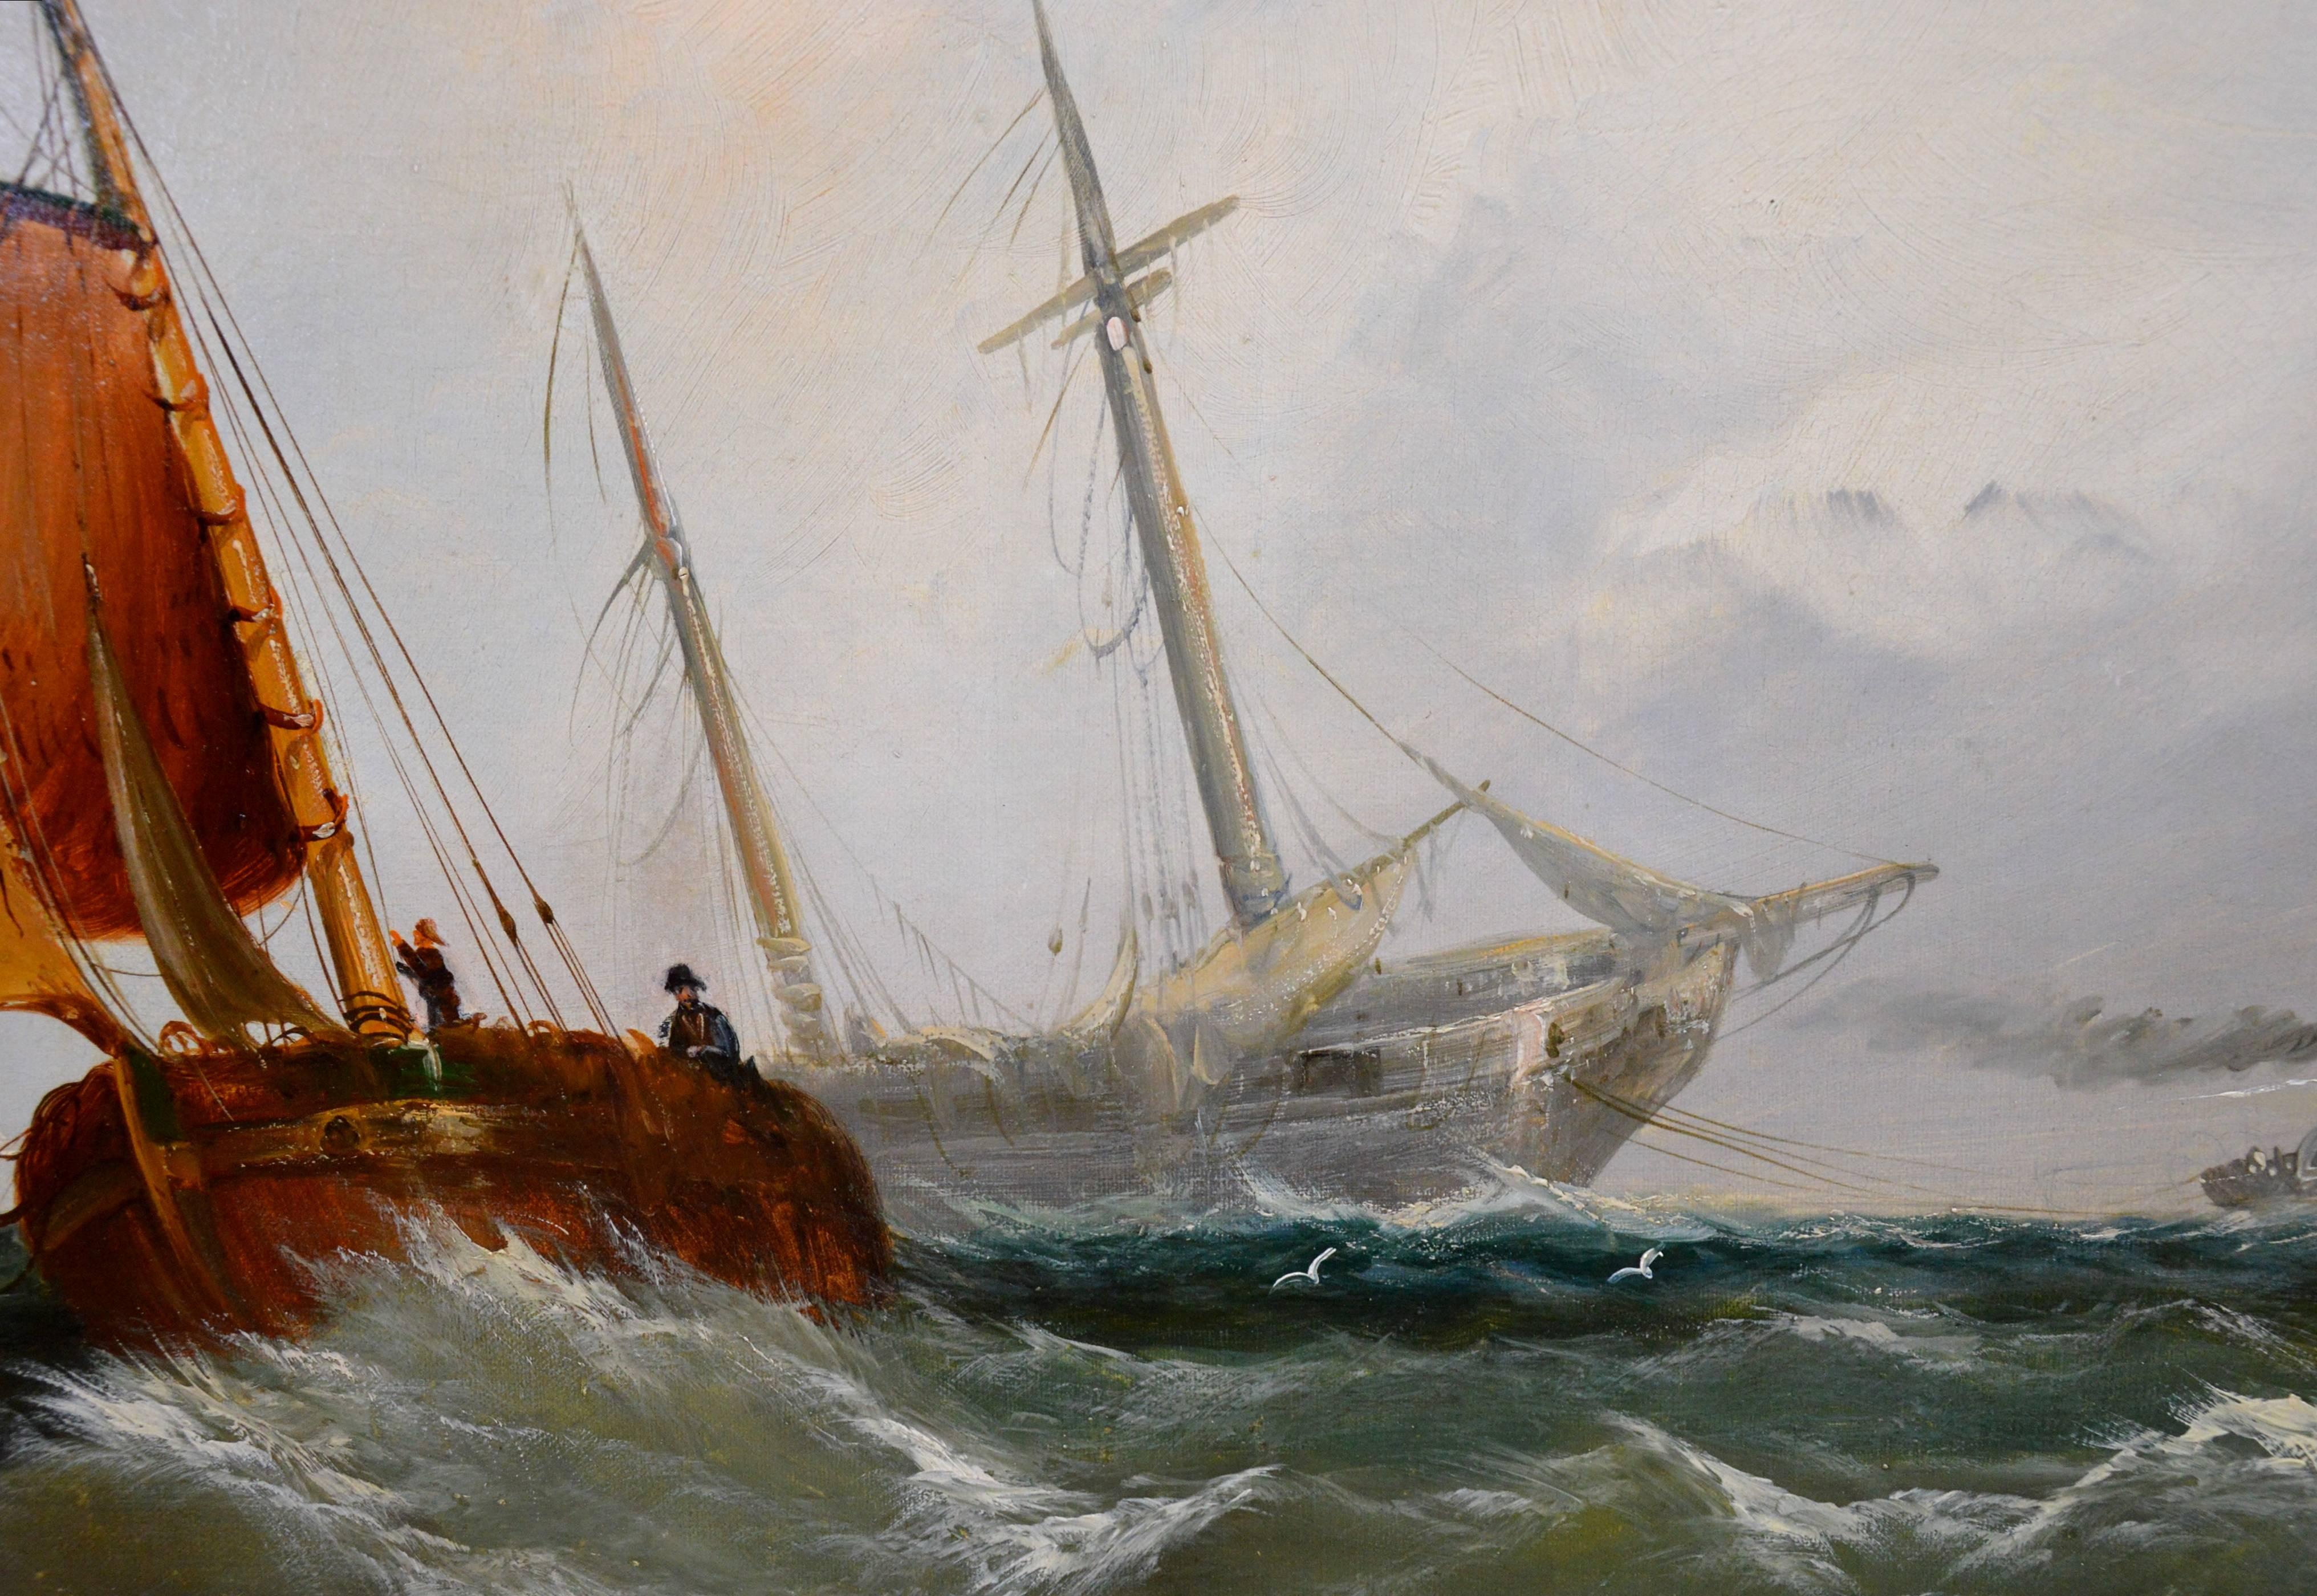 On the Medway - Exhibited at the Royal Academy in 1864 1